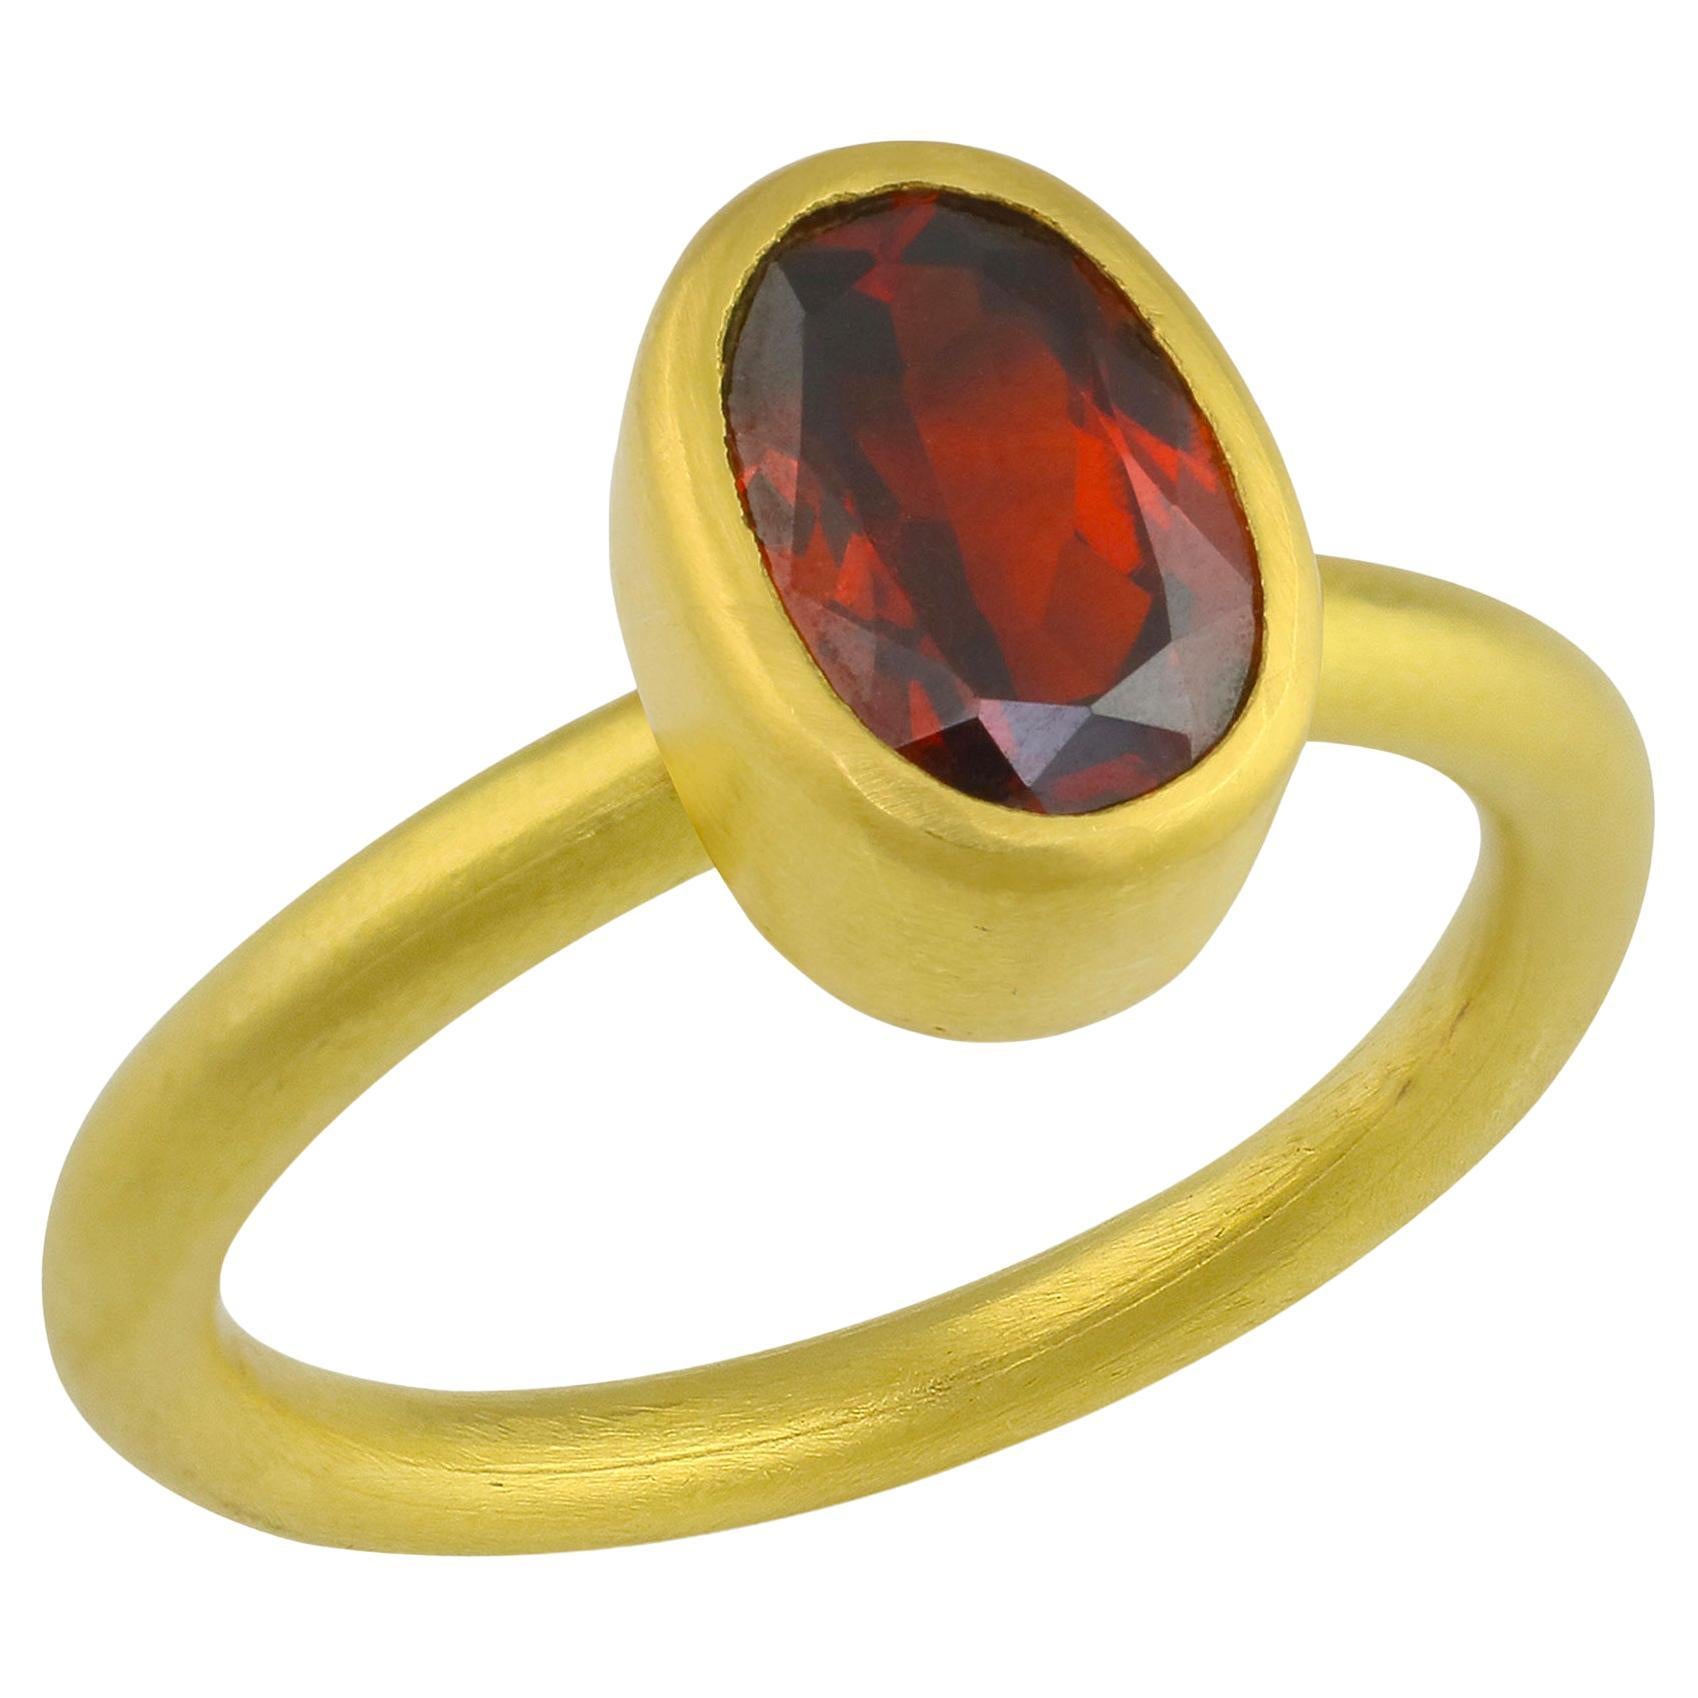 PHILIPPE SPENCER 2.4 Ct. Spessartine in 22K and 20K Gold Solitaire Ring